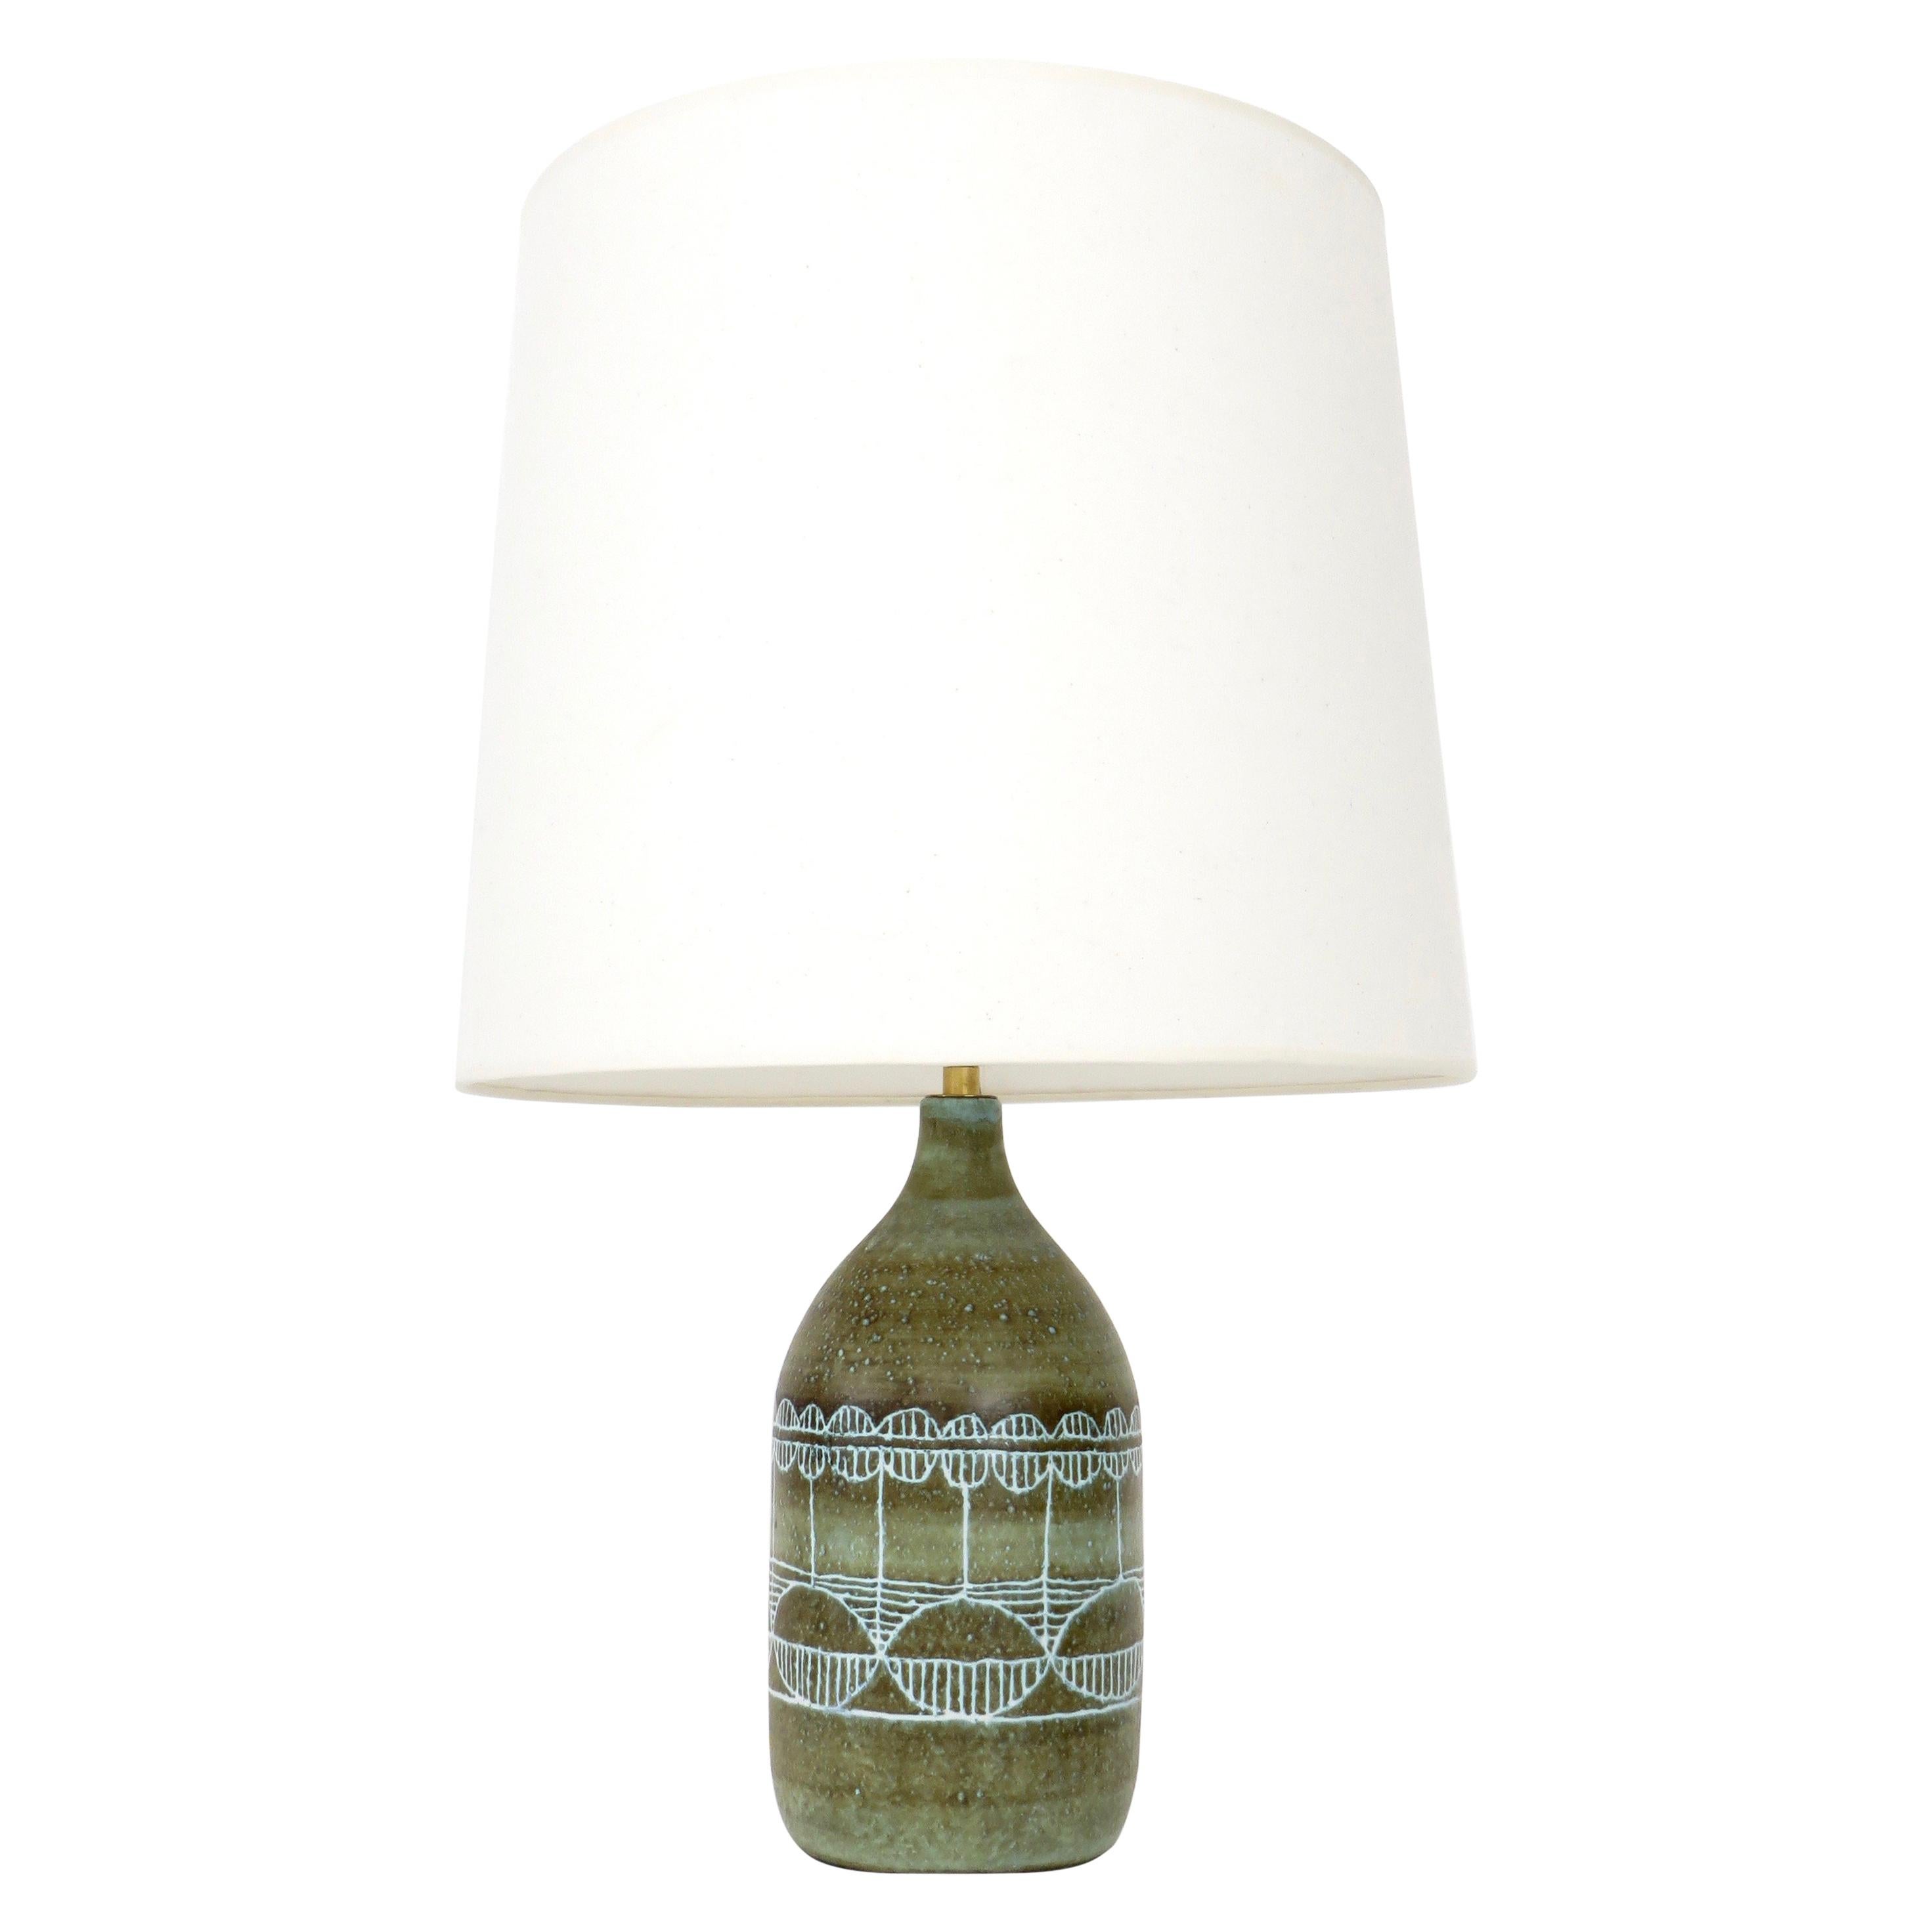 2 Potiers French Ceramic Table Lamp